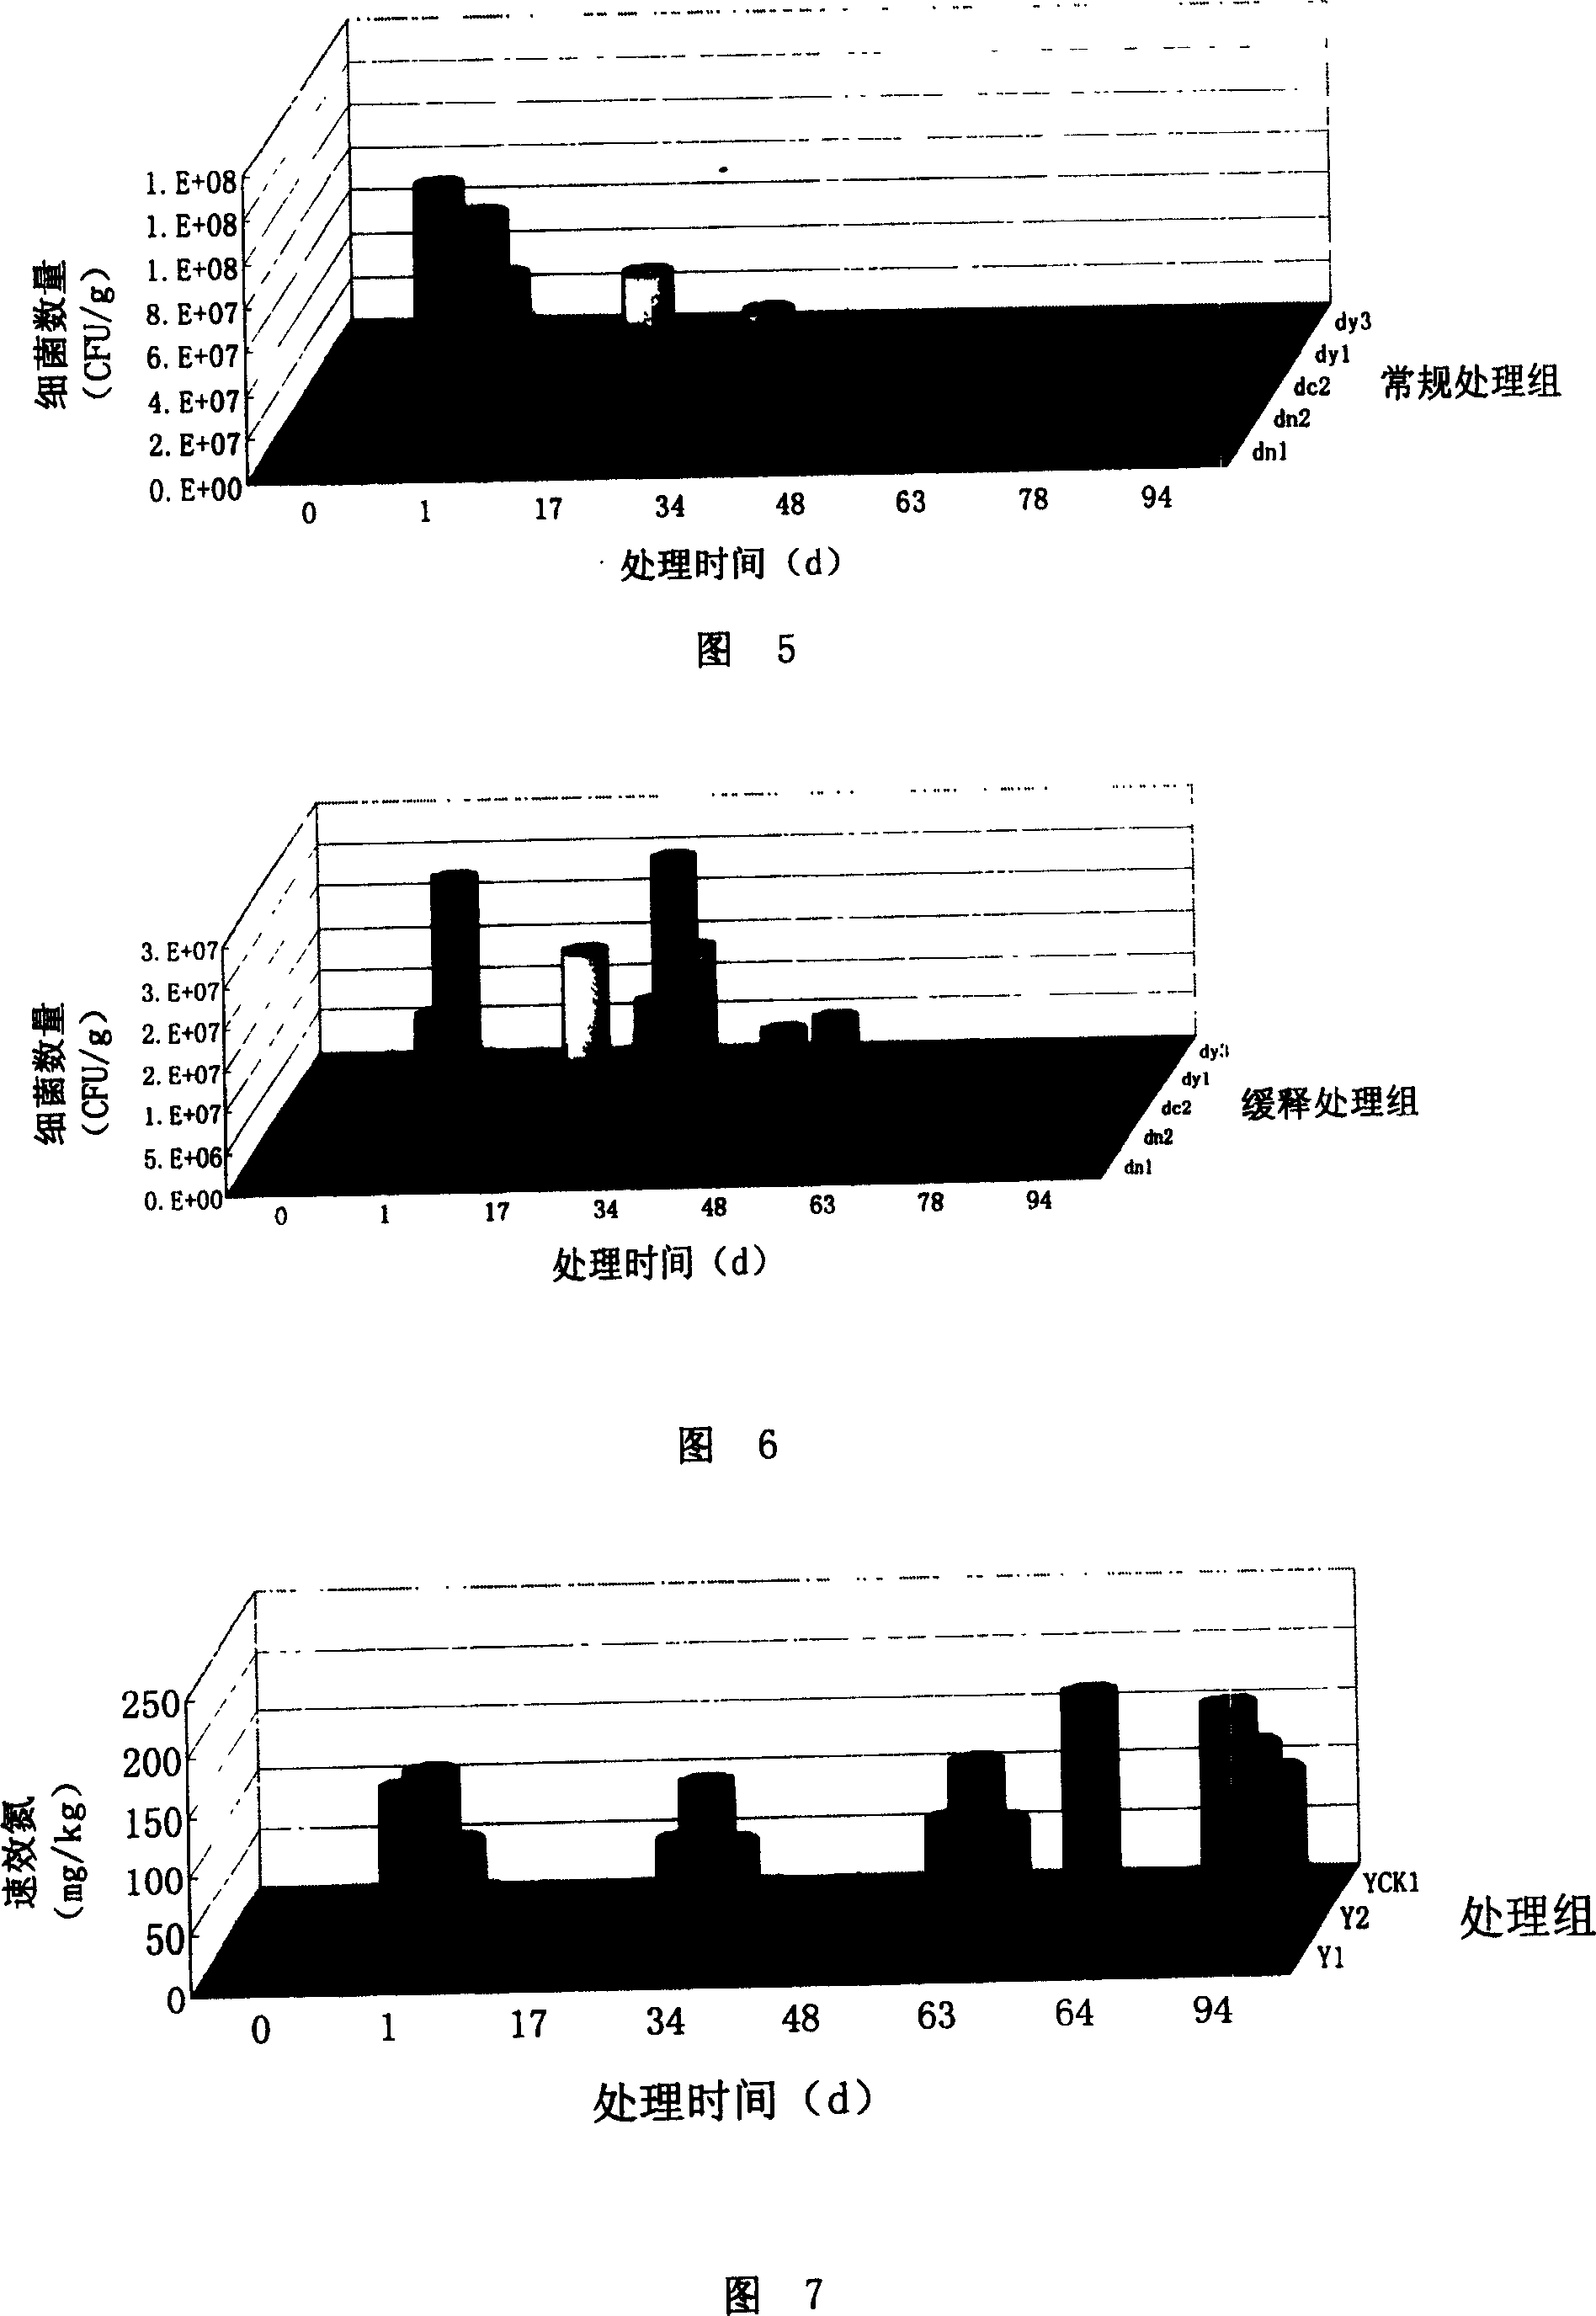 Method of treating oil contaminated soil and its special bacterin group